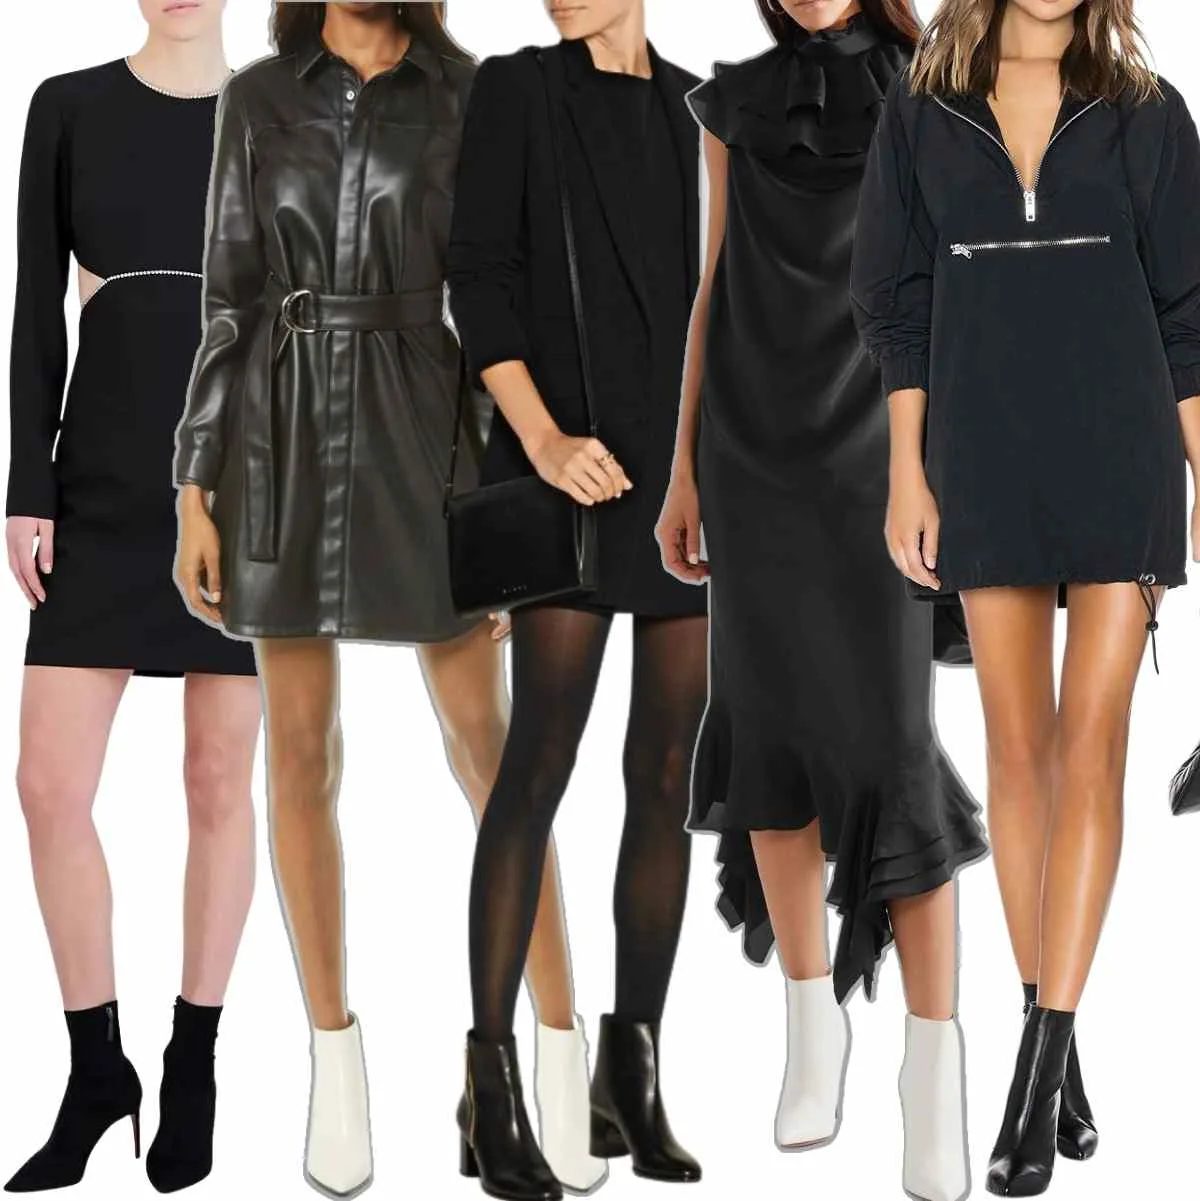 How To Wear Black Ankle Boots With Dresses - Just for Fun